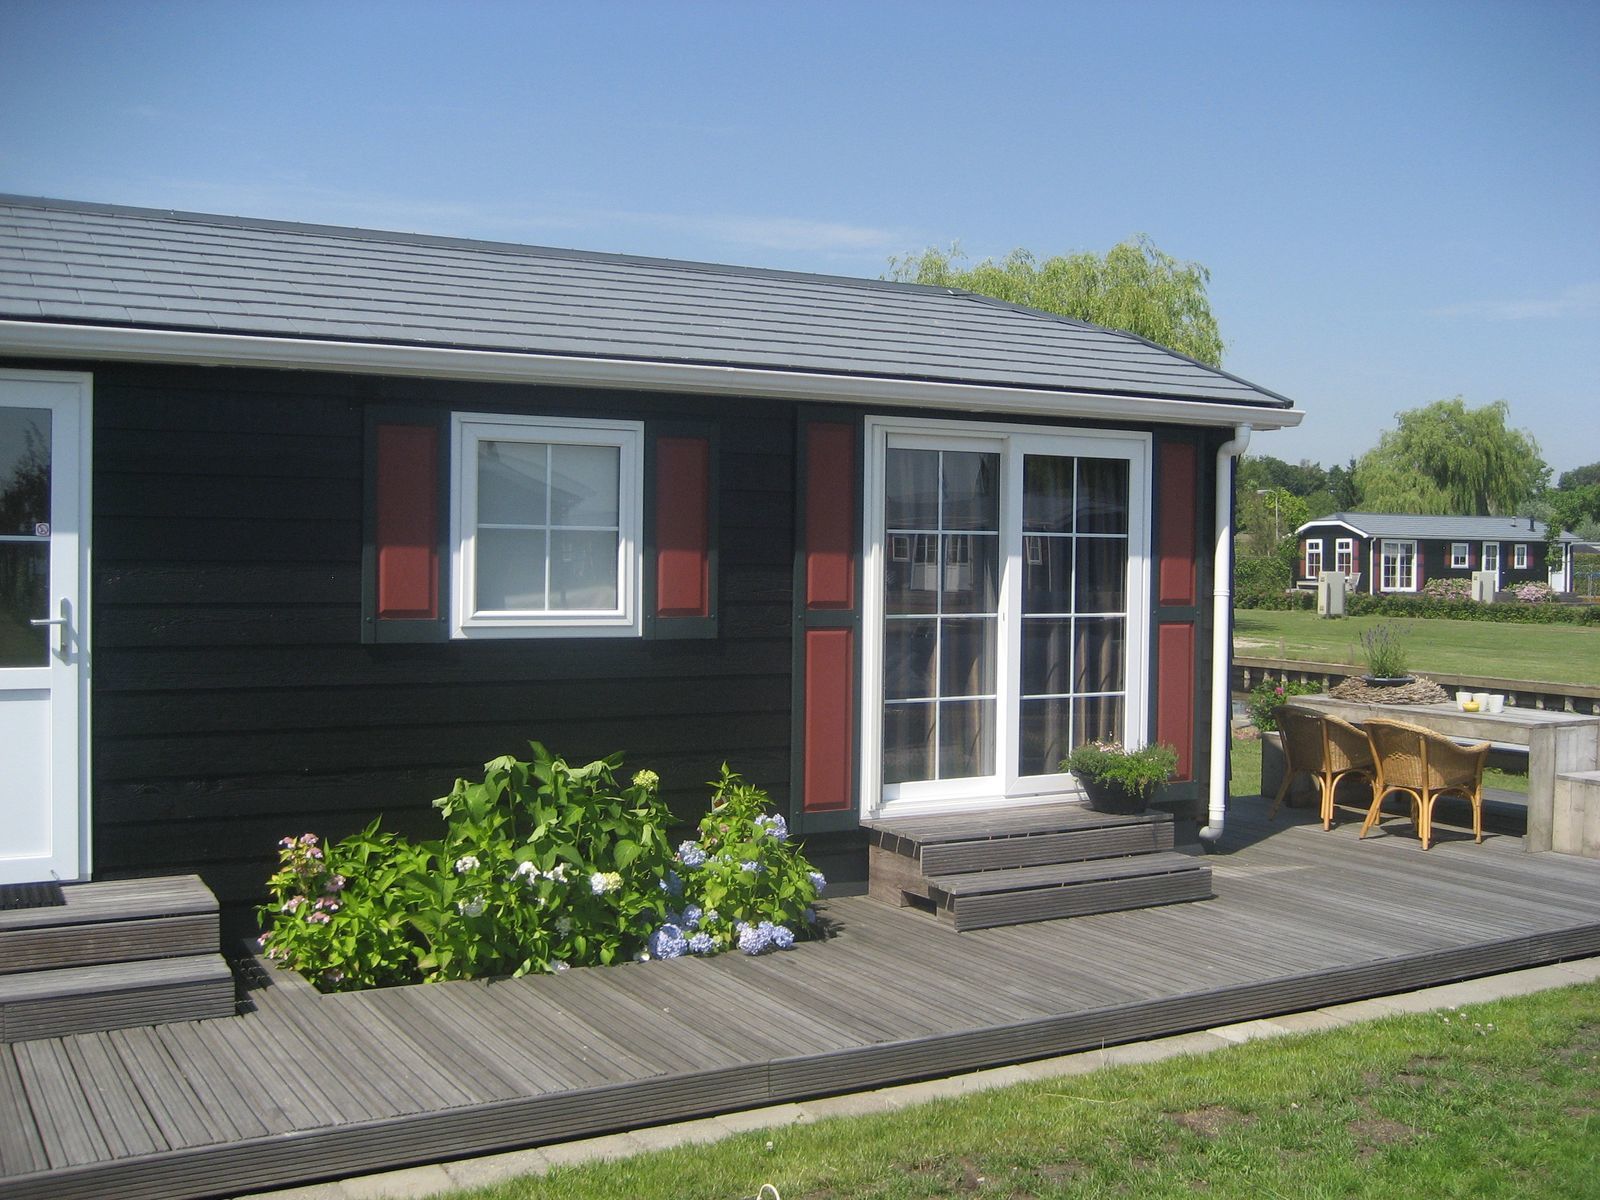 Chalet "'t Wiede" suitable for up to four guests